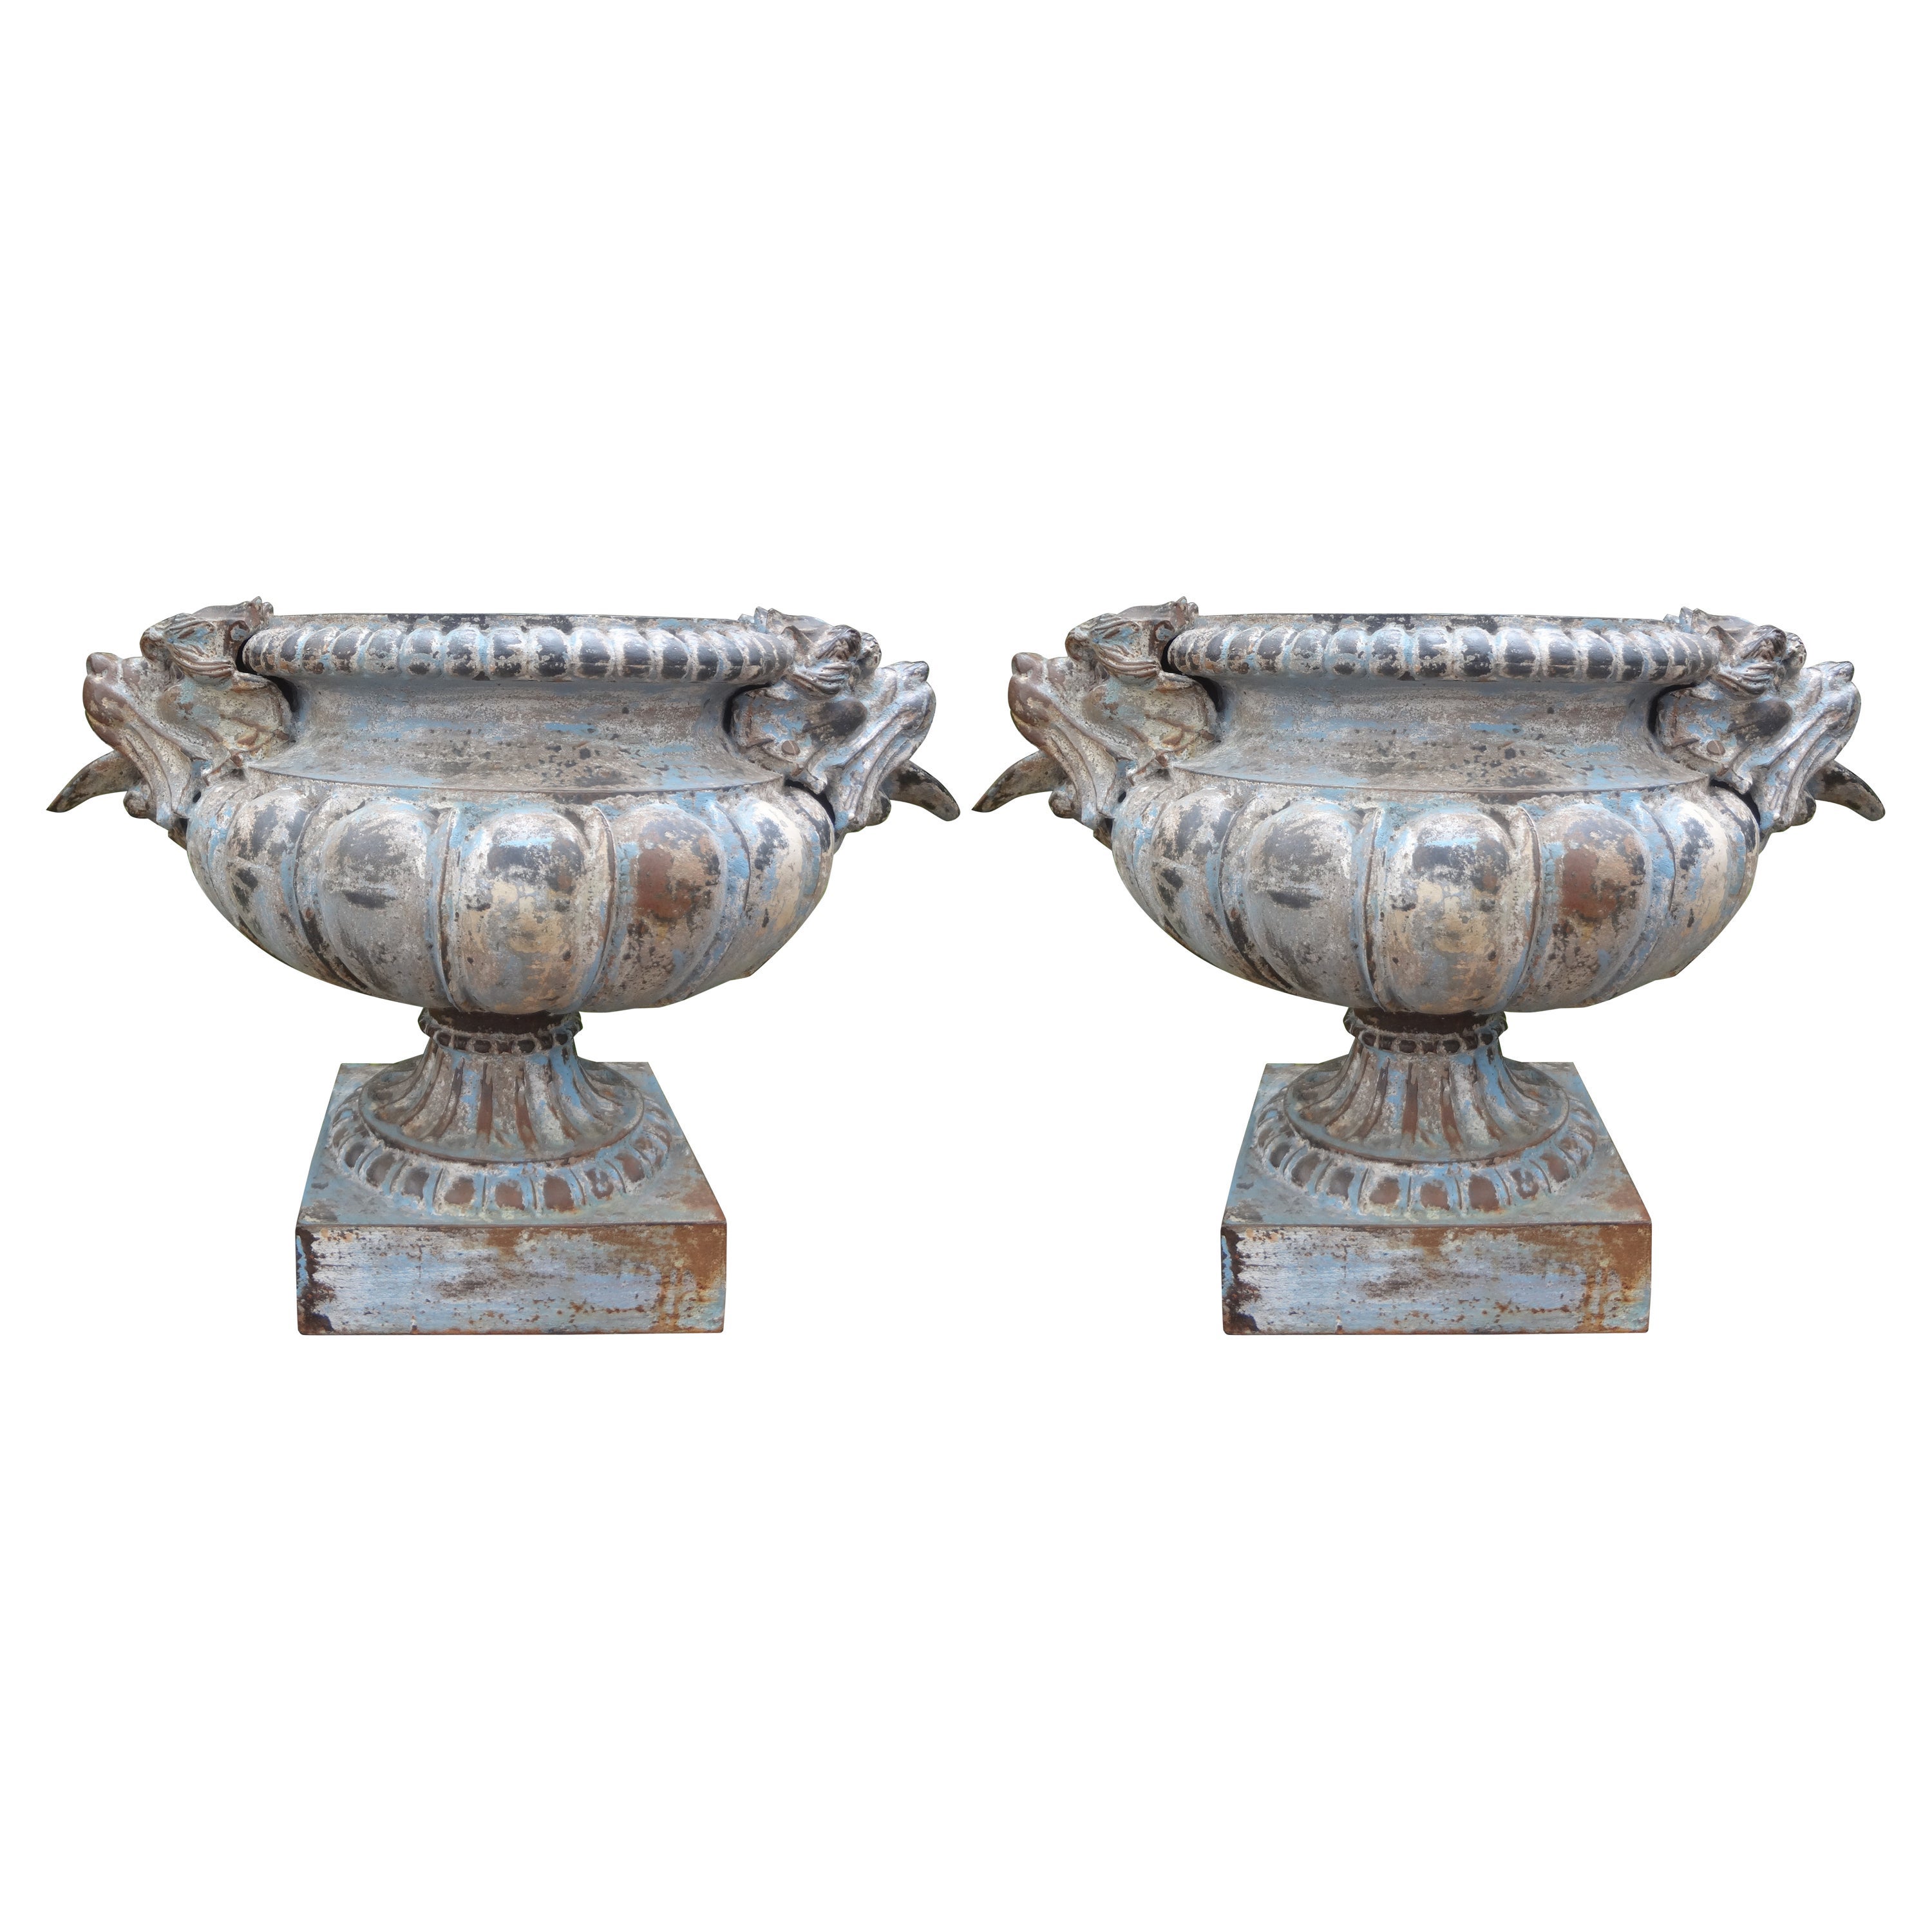 Pair of 19th Century French Cast Iron Garden Urns Attributed to Alfred Corneau